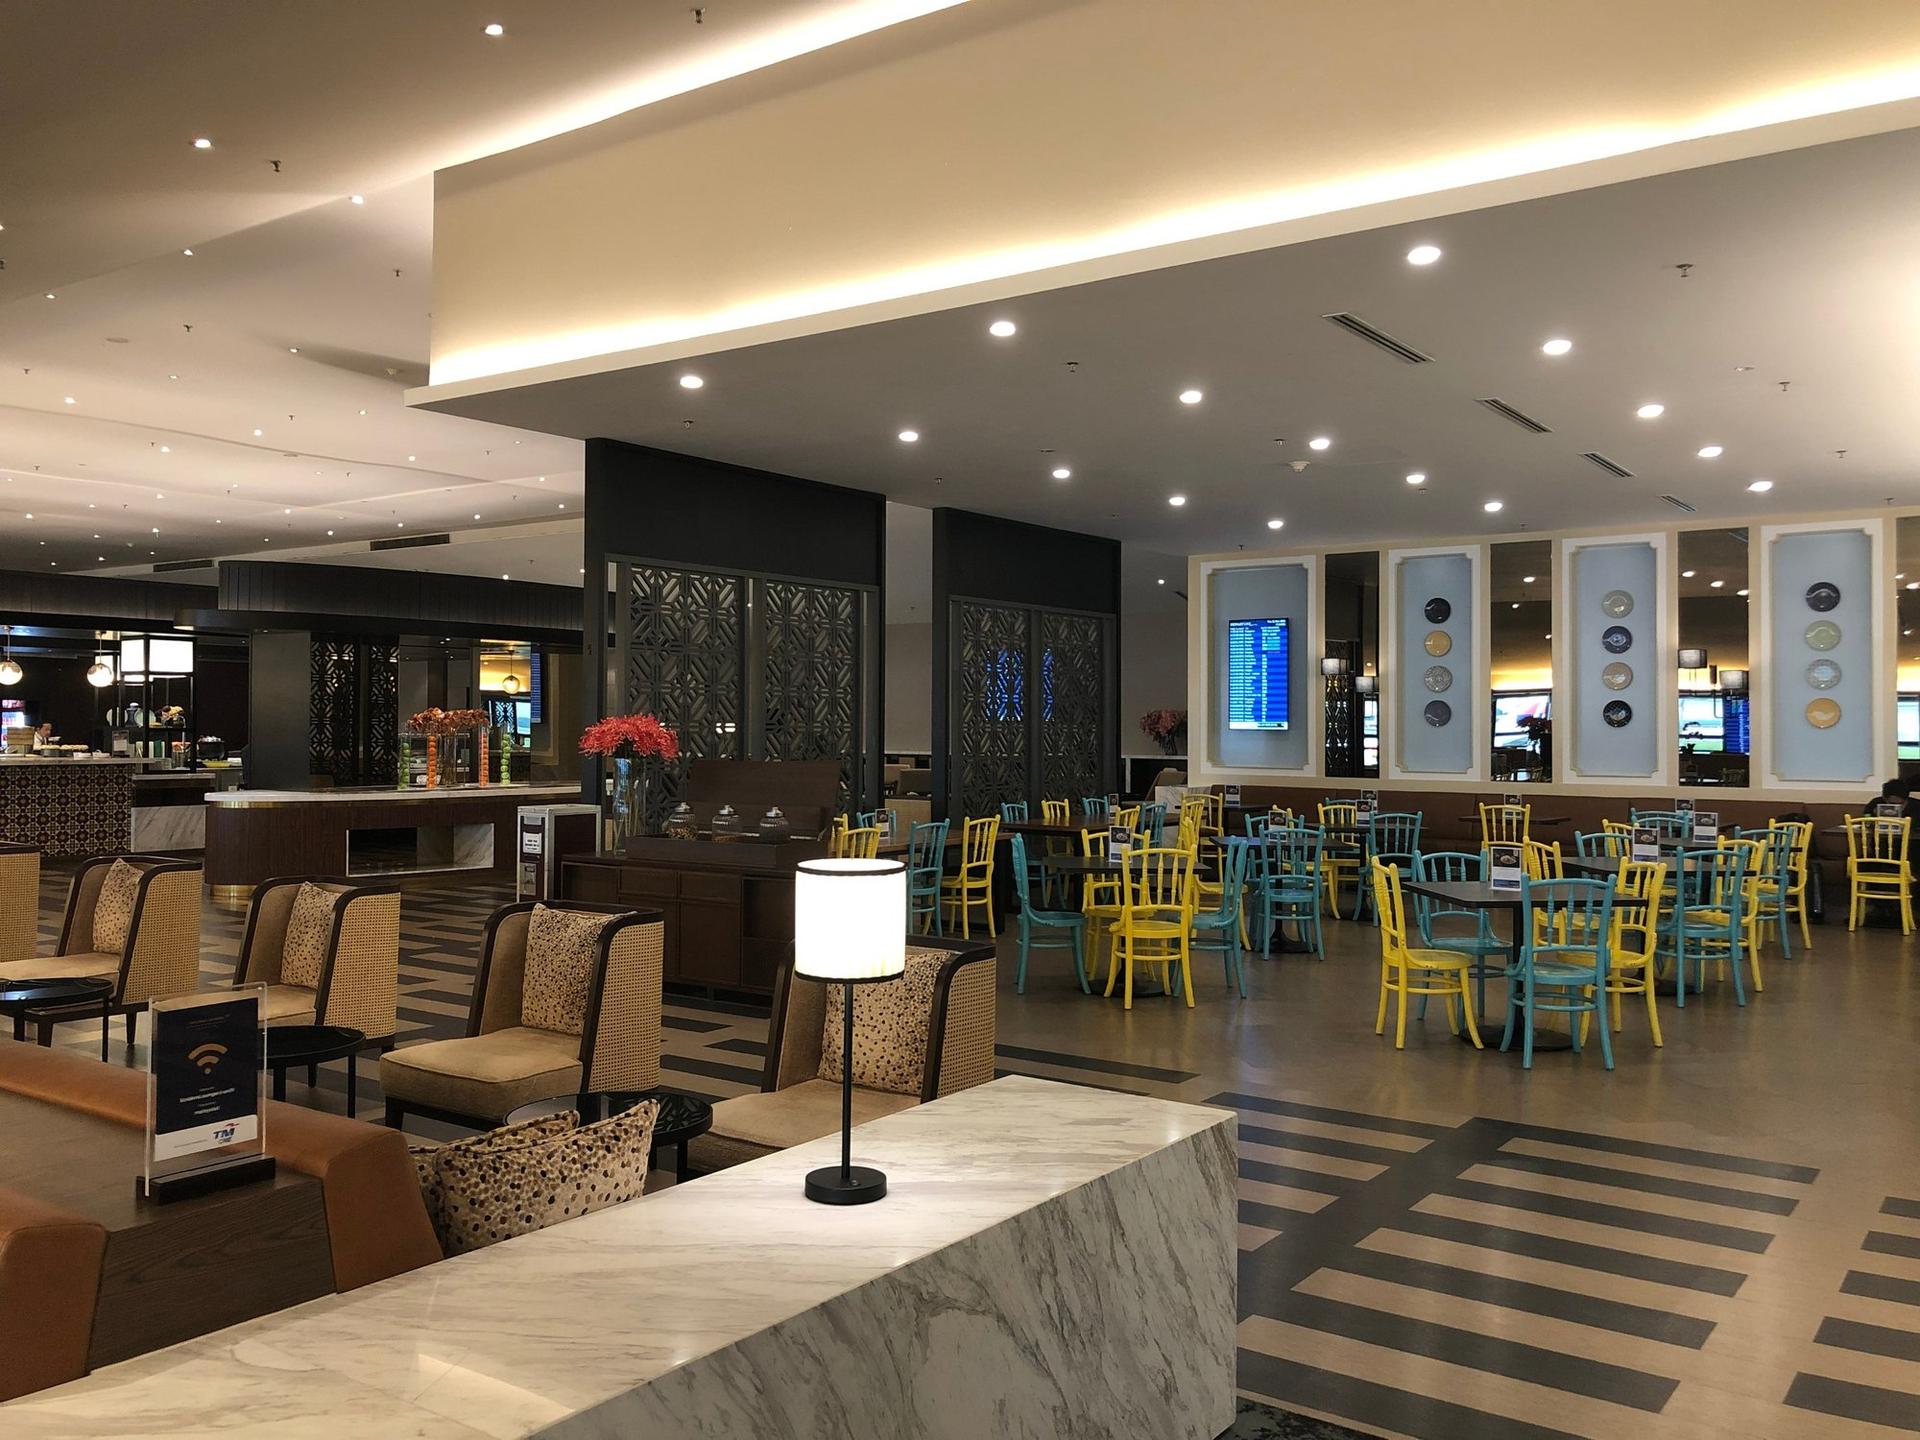 Malaysia Airlines Golden Business Class Lounge image 16 of 27